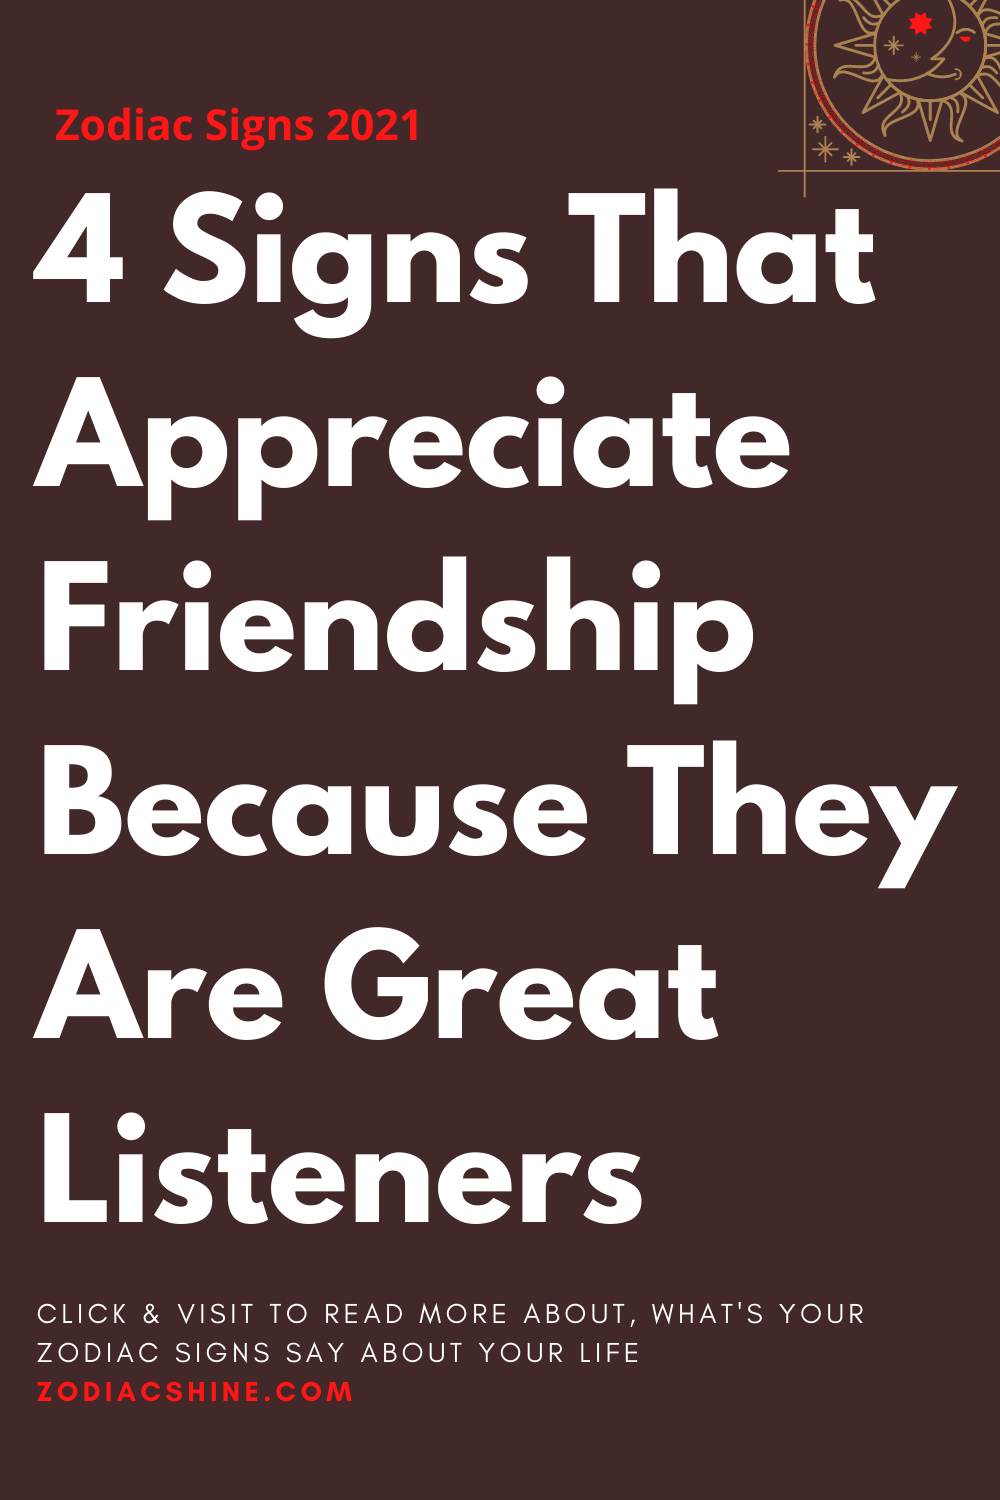 4 Signs That Appreciate Friendship Because They Are Great Listeners